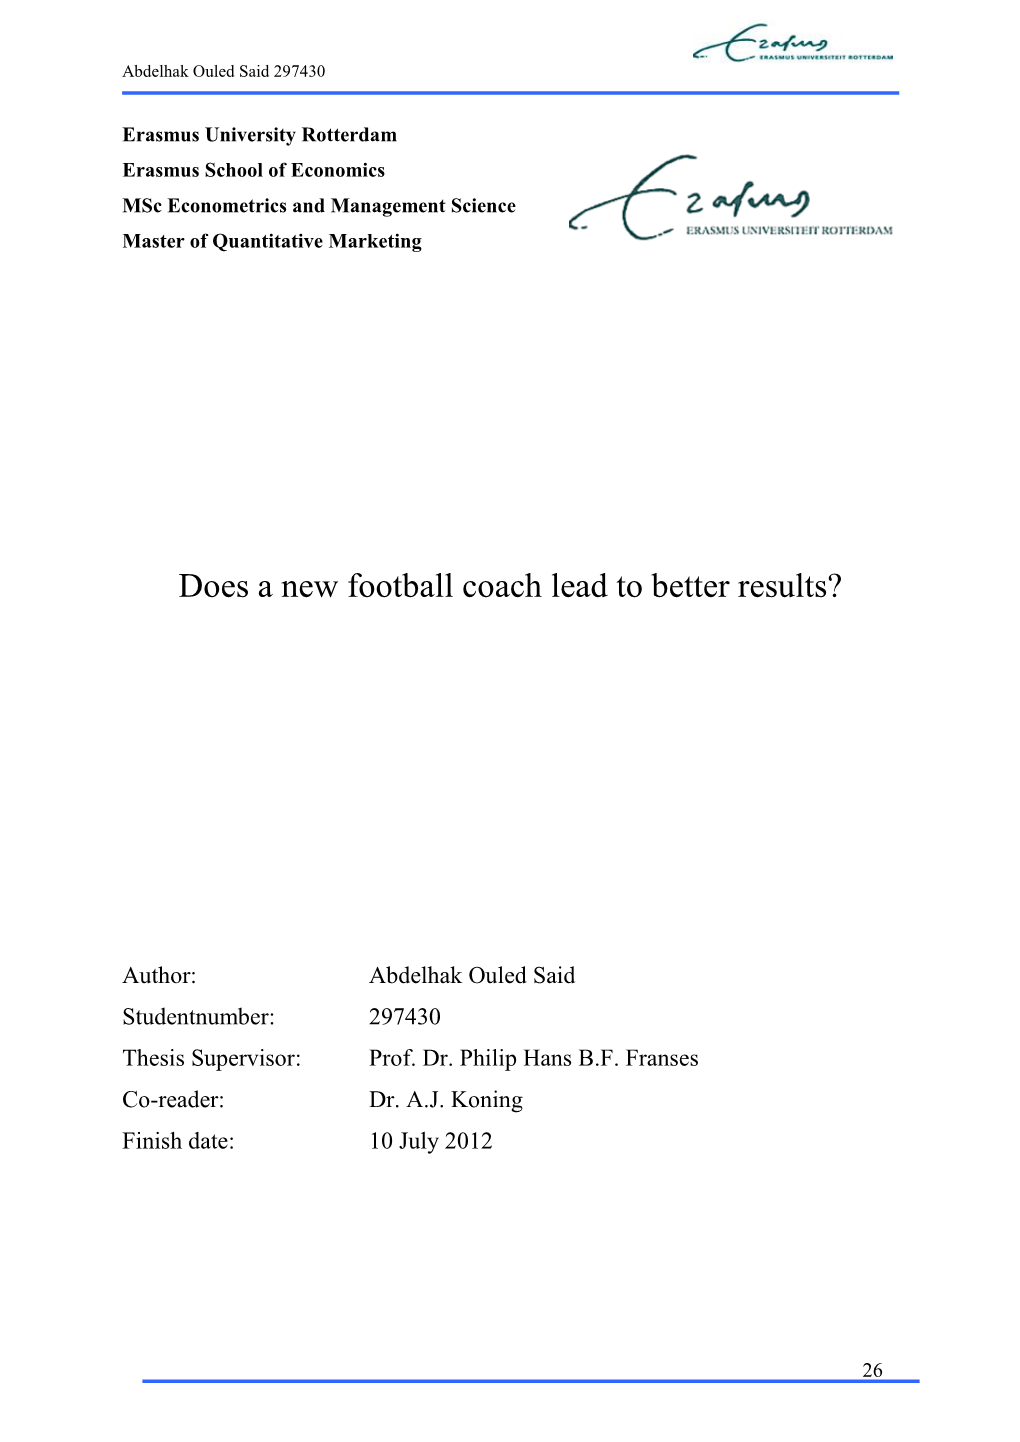 Does a New Football Coach Lead to Better Results?